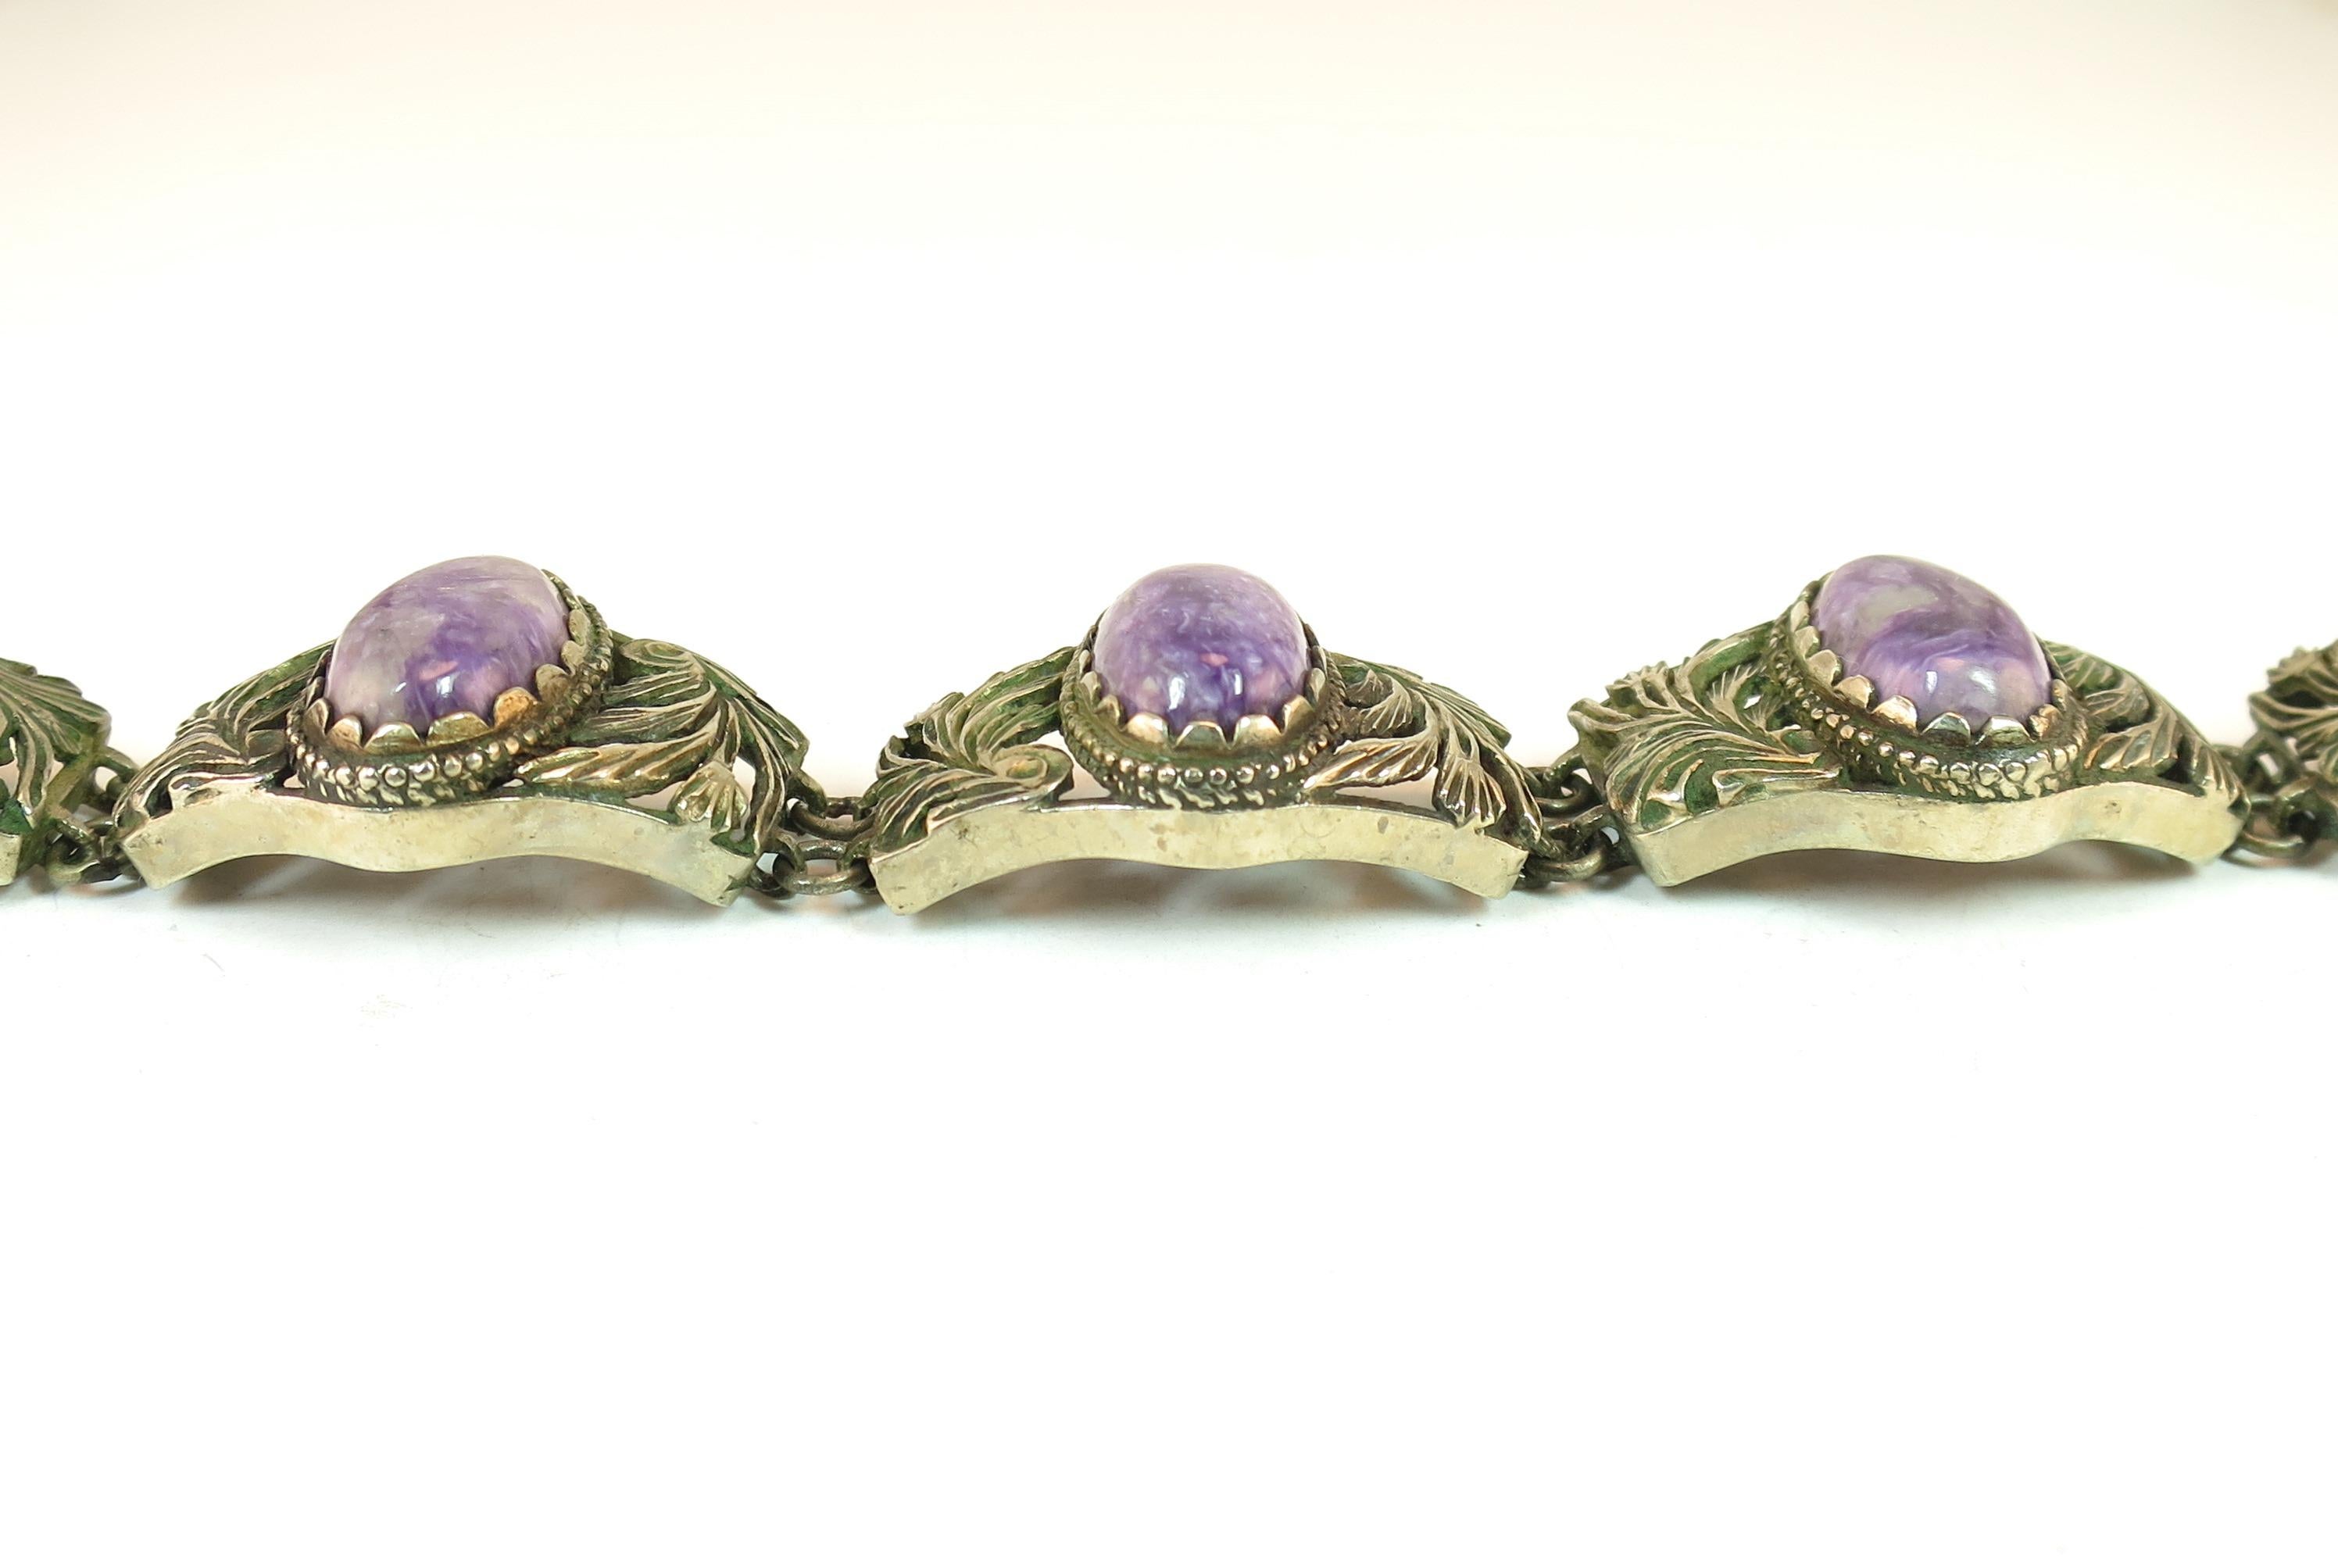 Victorian Chinese Export Silver & Amethyst Link Bracelet, Circa 1860s In Good Condition For Sale In Burbank, CA